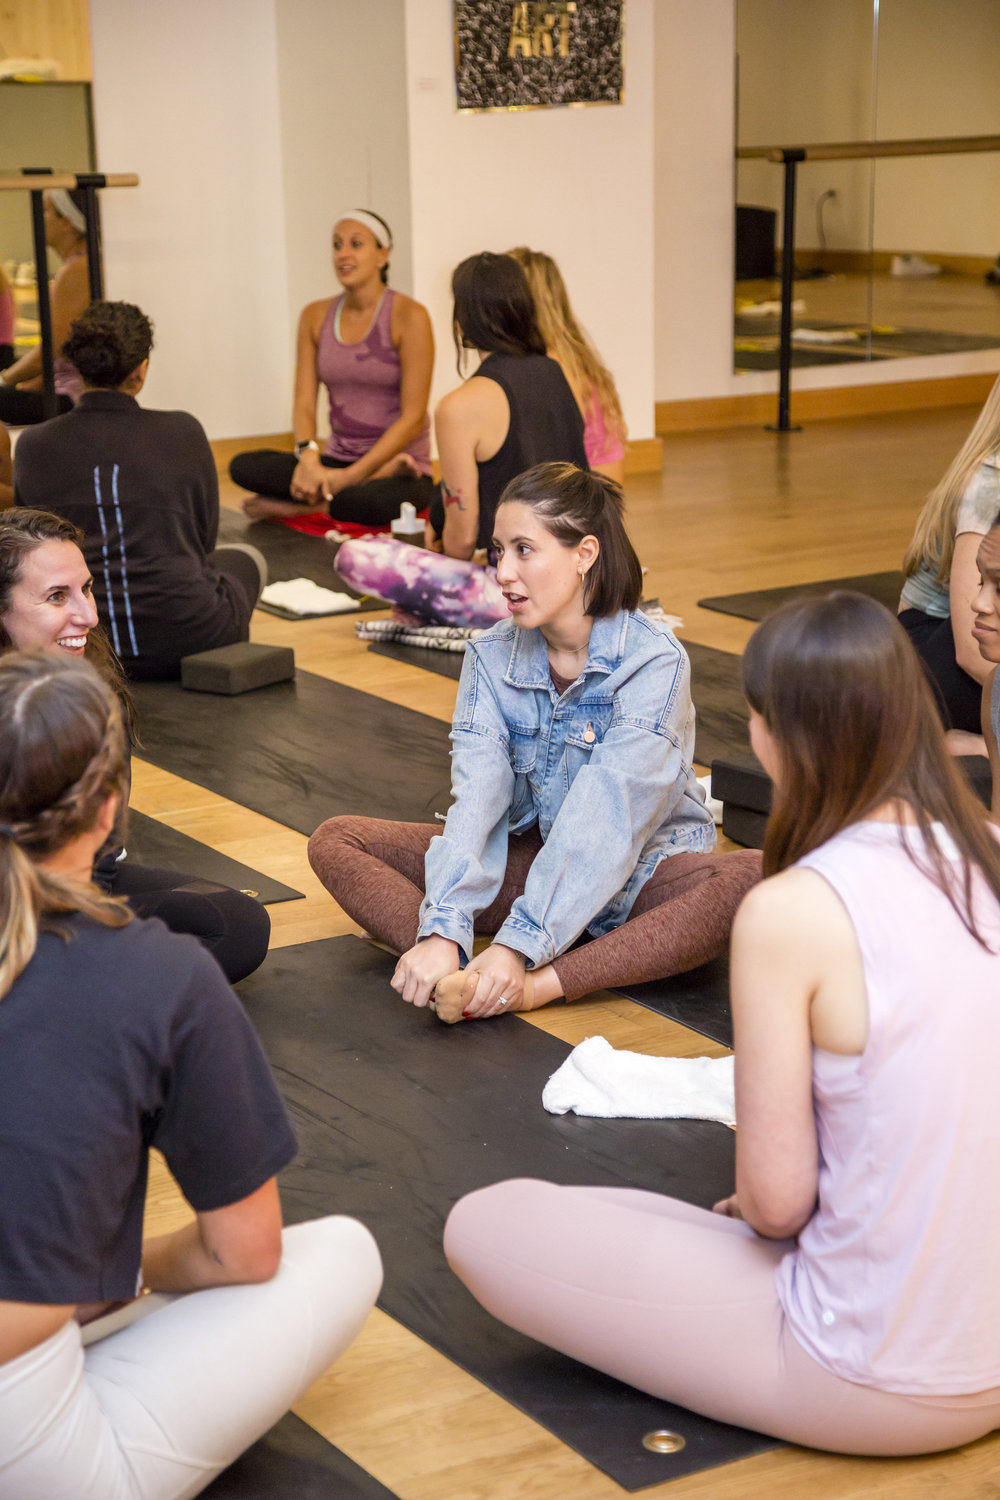 a sweatworking event dedicated to wellness, connection, and community